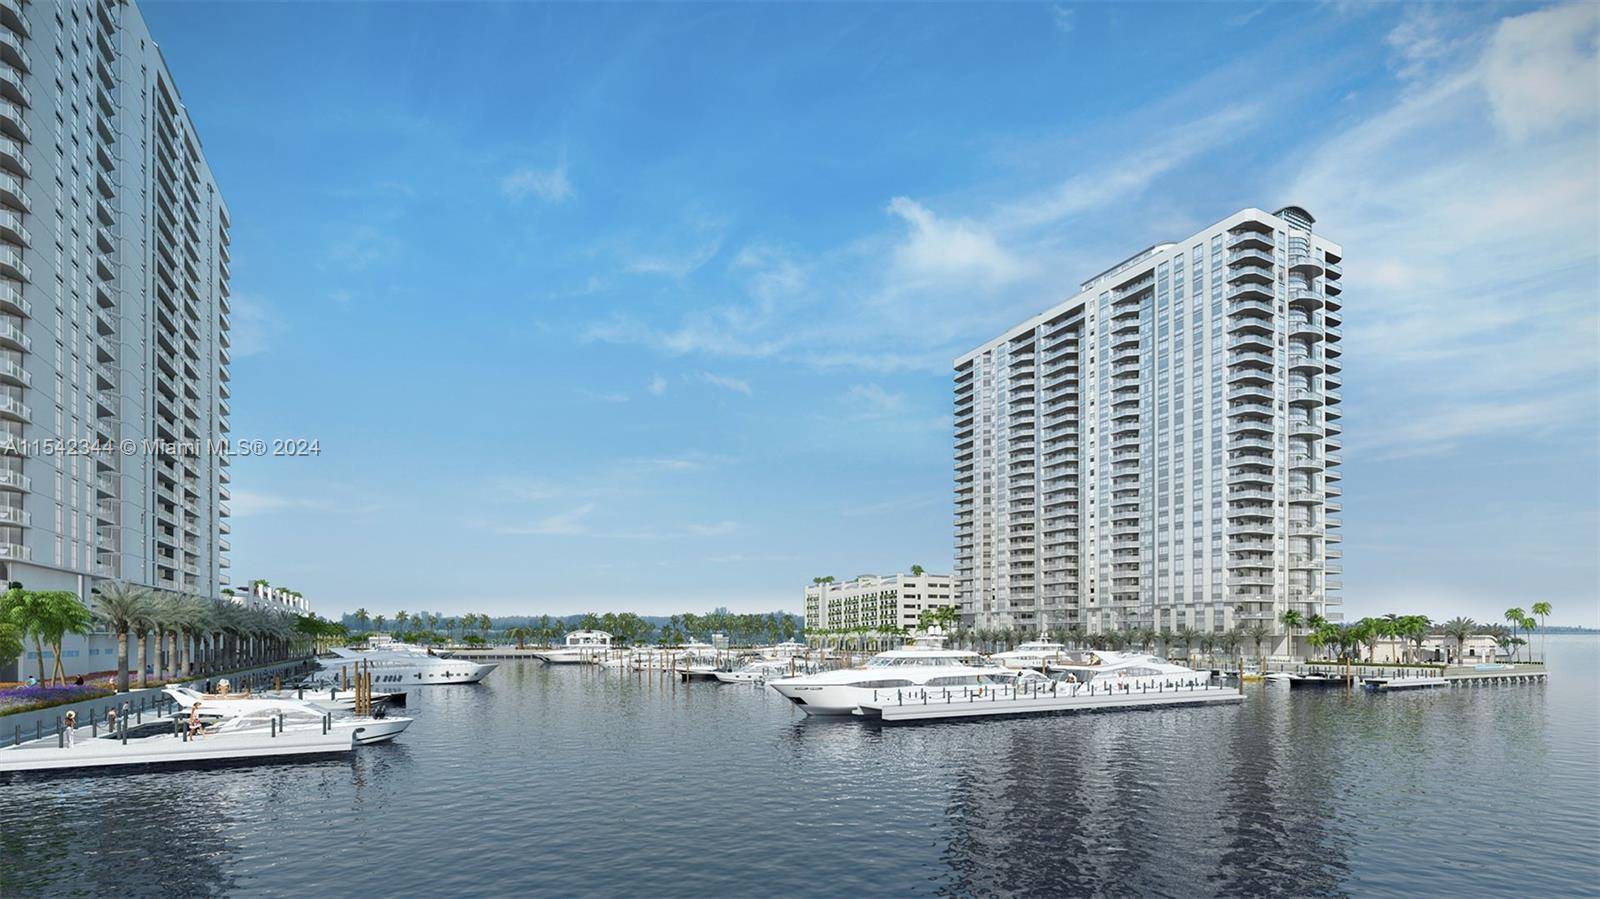 Experience luxury yachting at the Marina Palms Yacht Club in North Miami Beach.